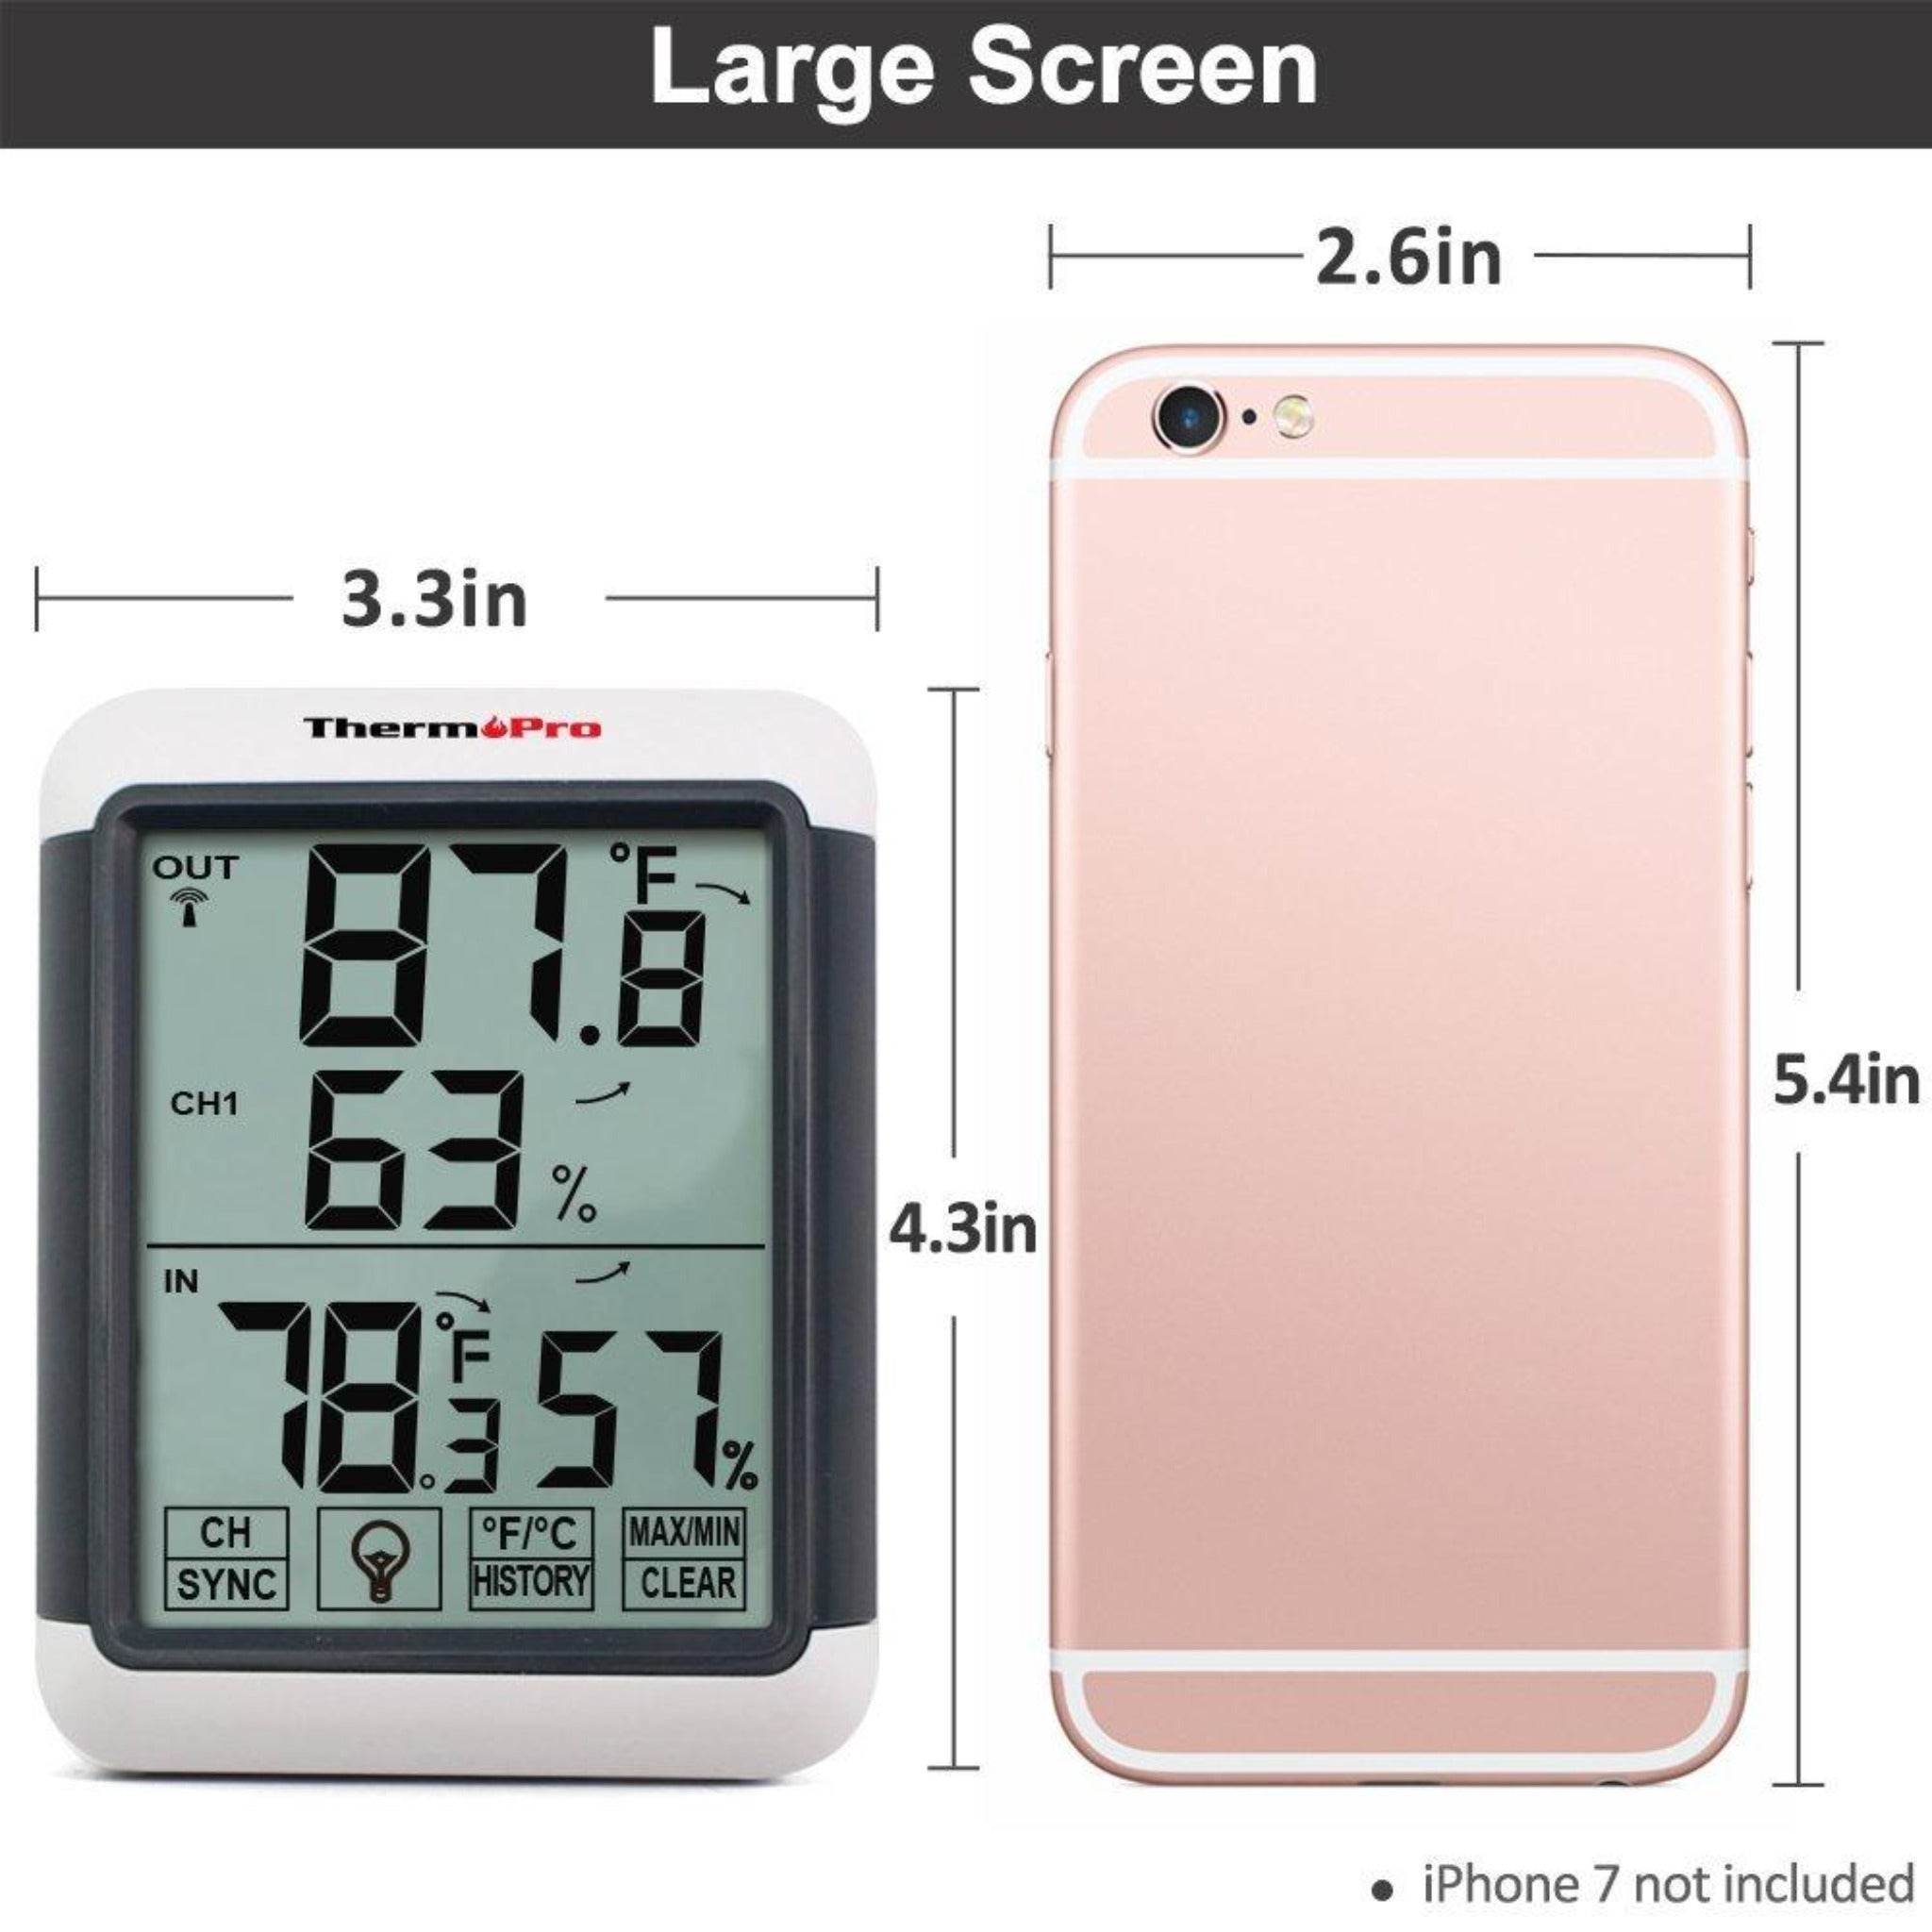 Hatching Time Therm Pro. Large screen dimensions shown for sensor. 3.3 in wide by 4.3 in long.